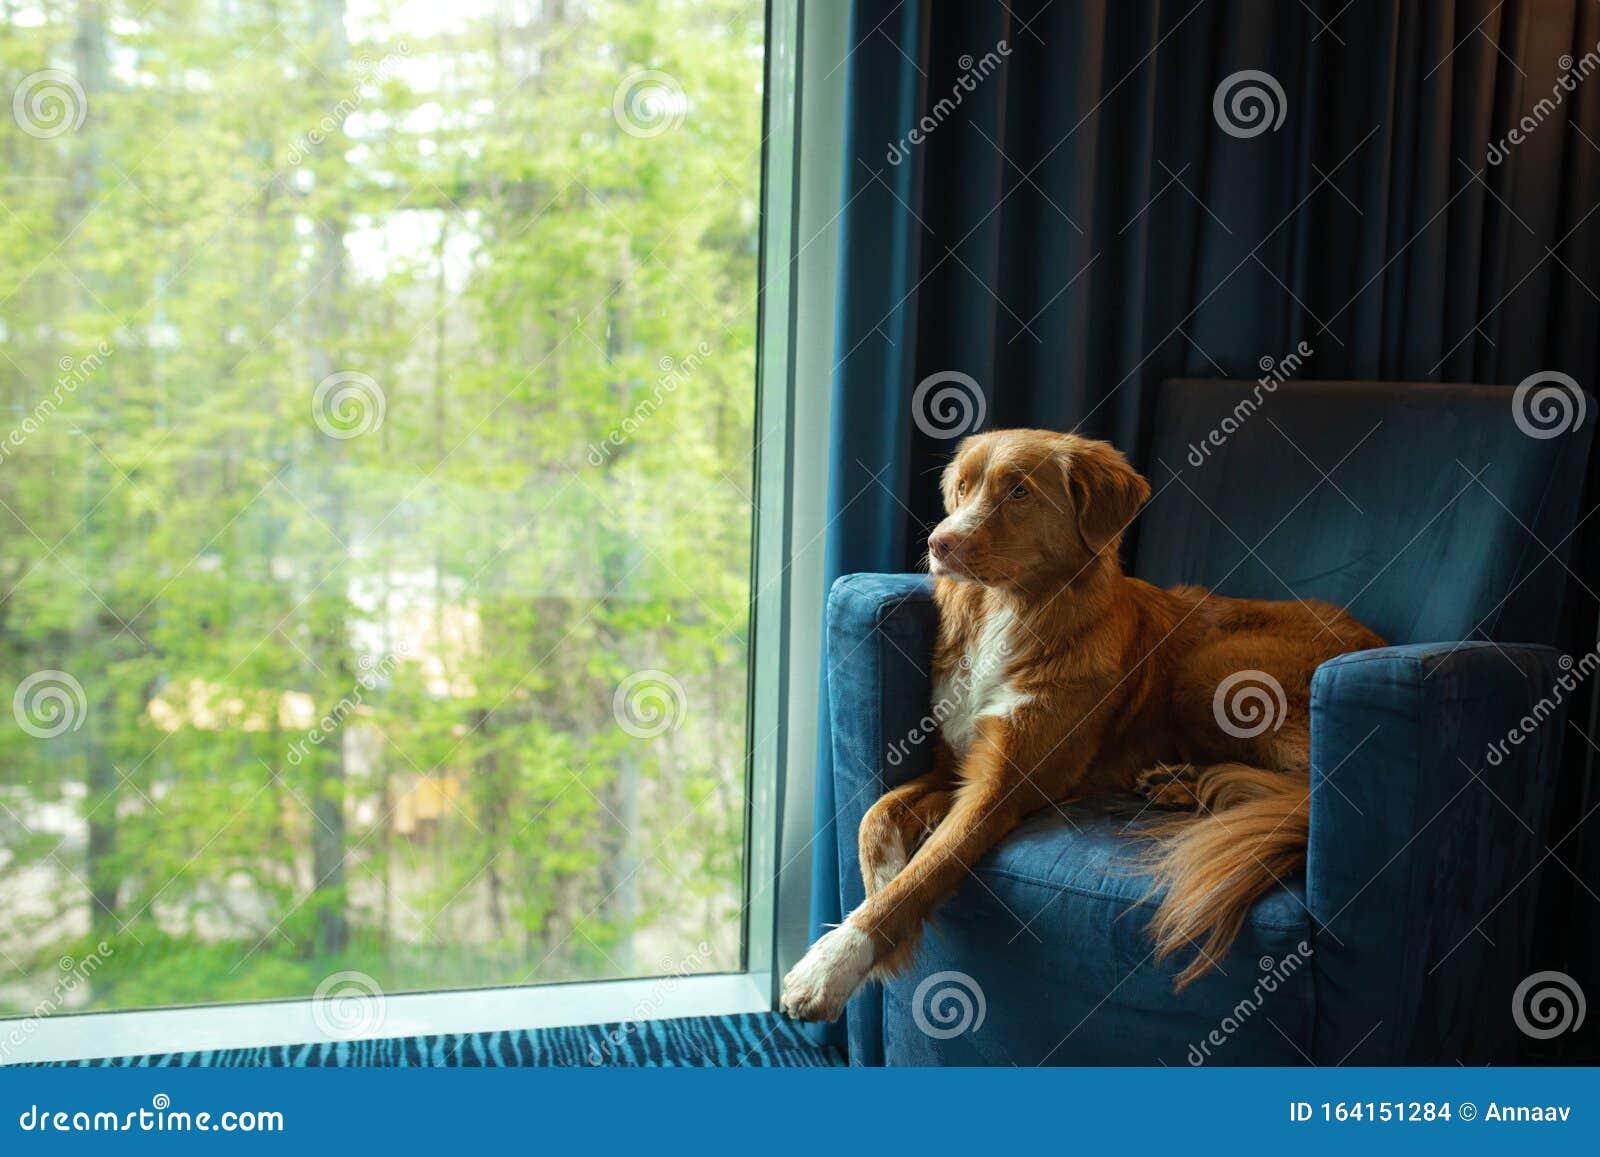 Dog On A Blue Armchair By The Window Nova Scotia Duck Tolling Retriever Inside Stock Photo Image Of Apartment Nature 164151284